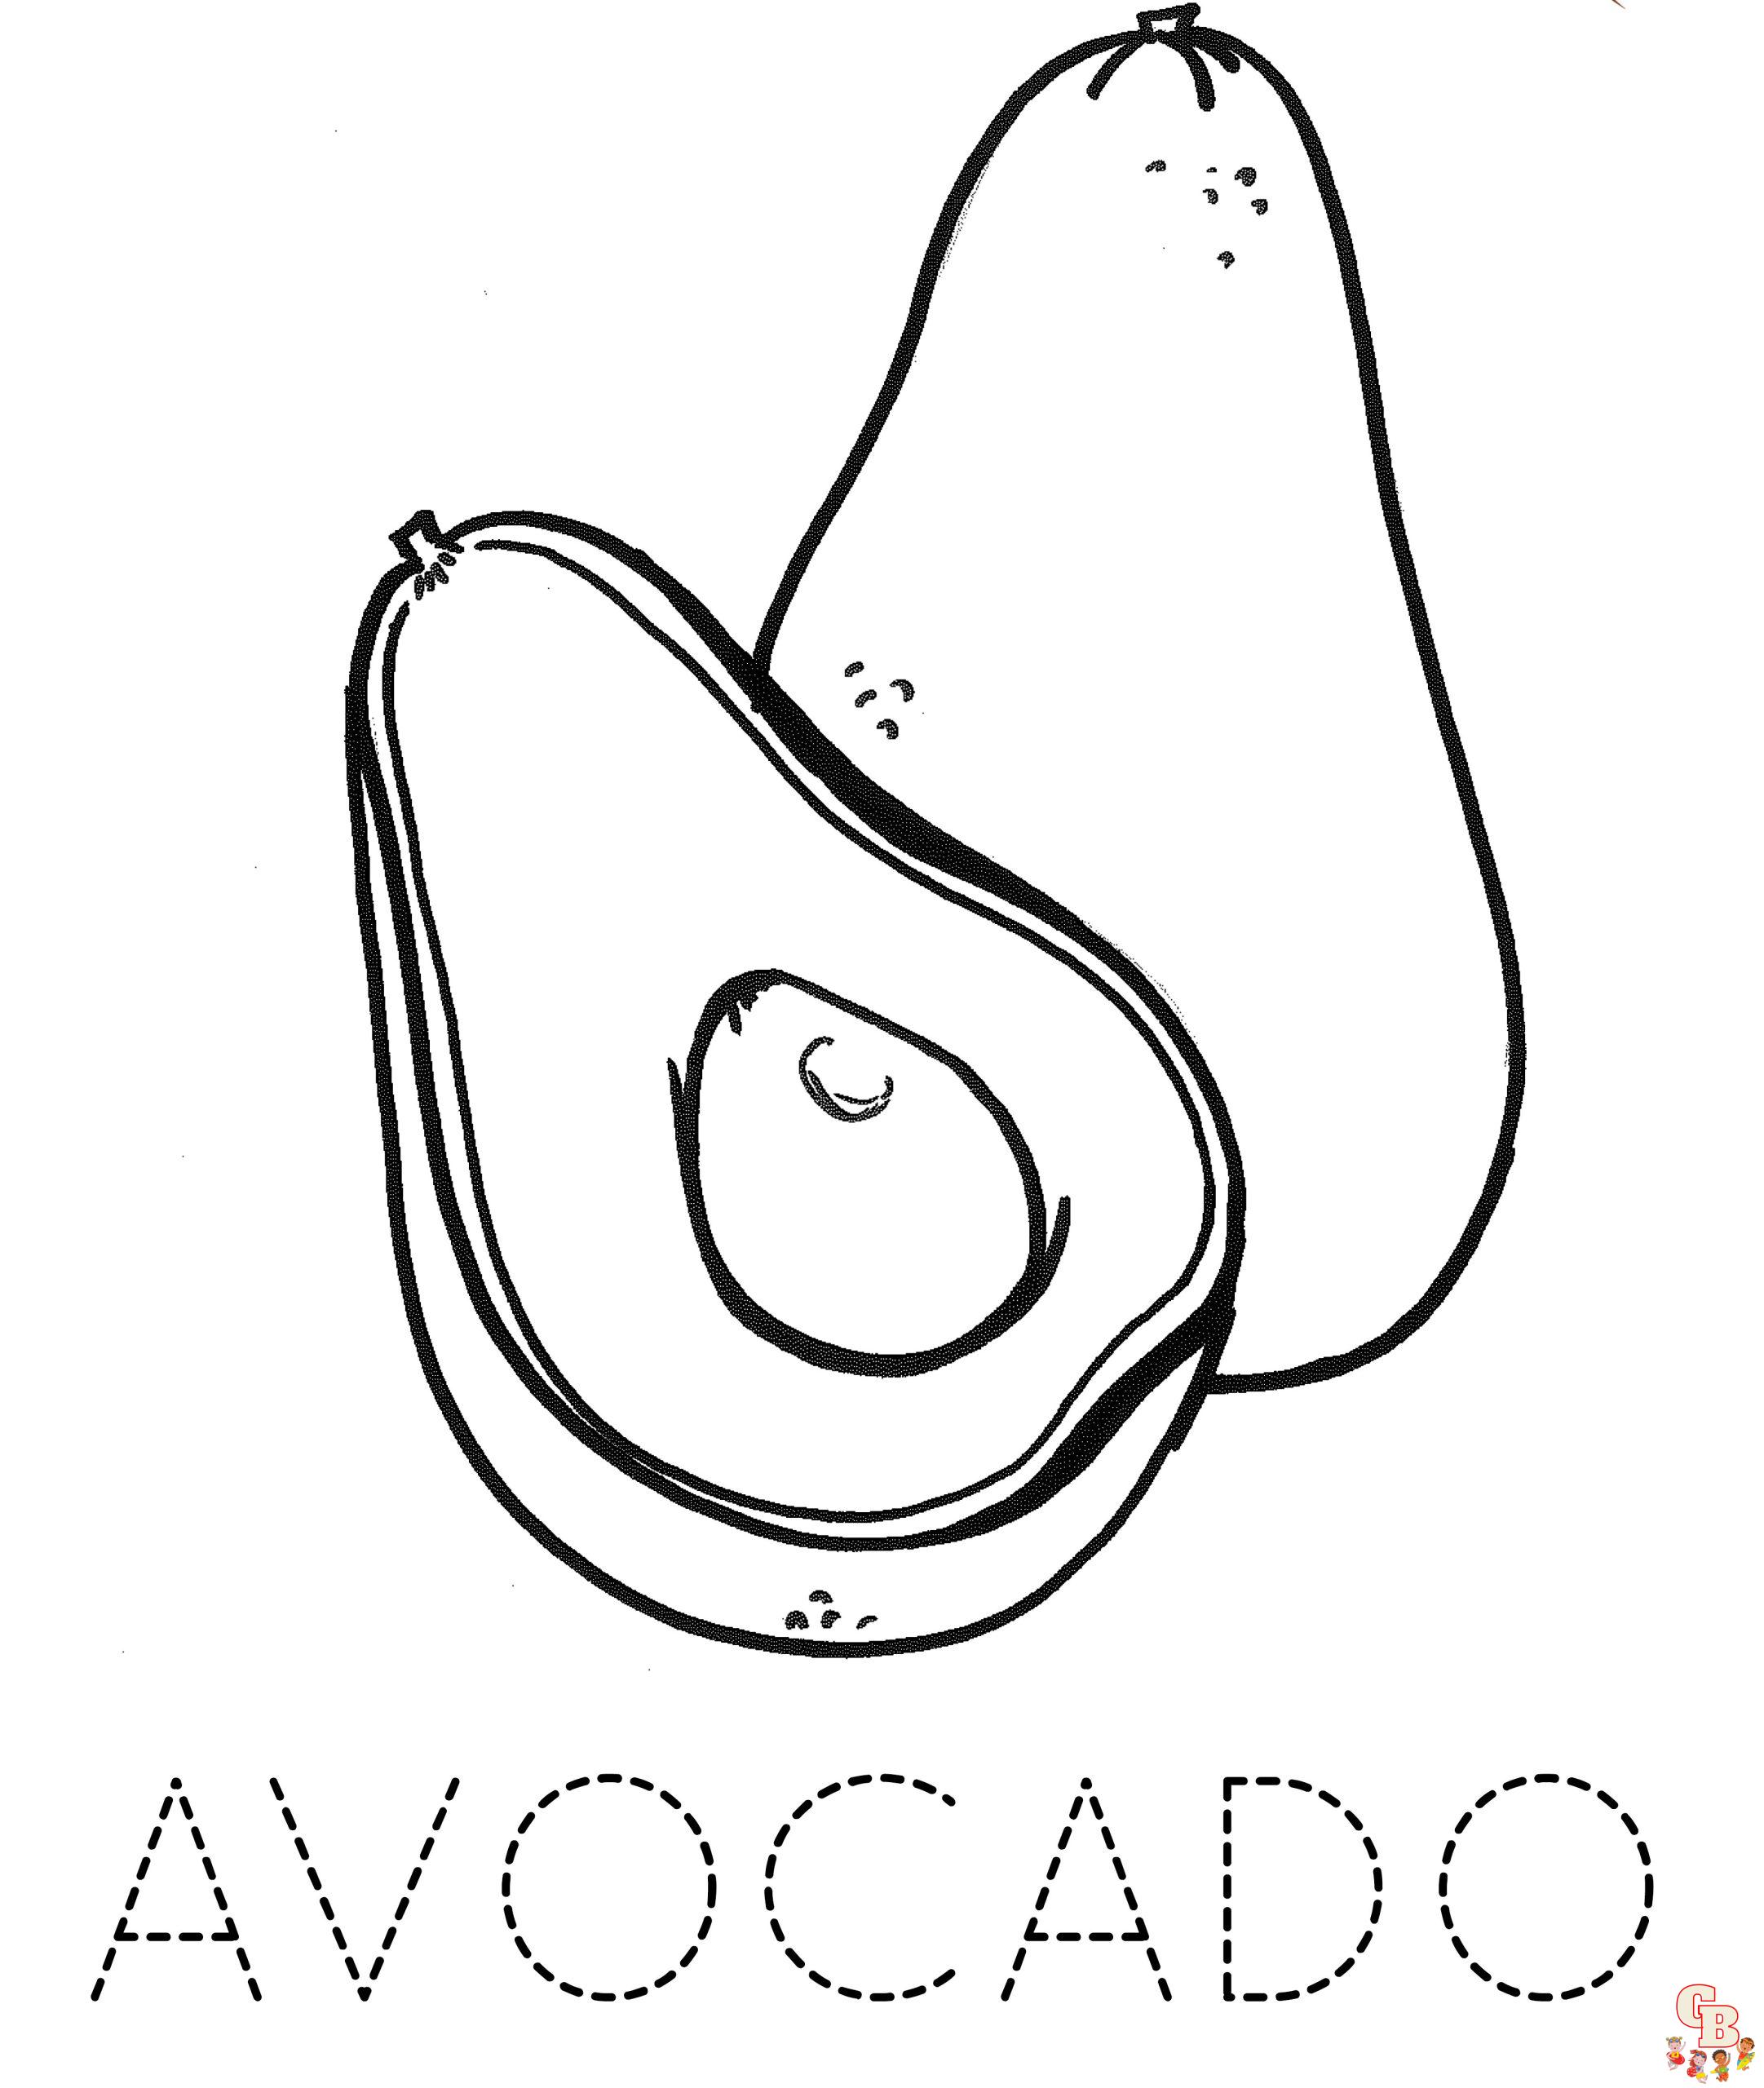 Avocado Coloring Pages